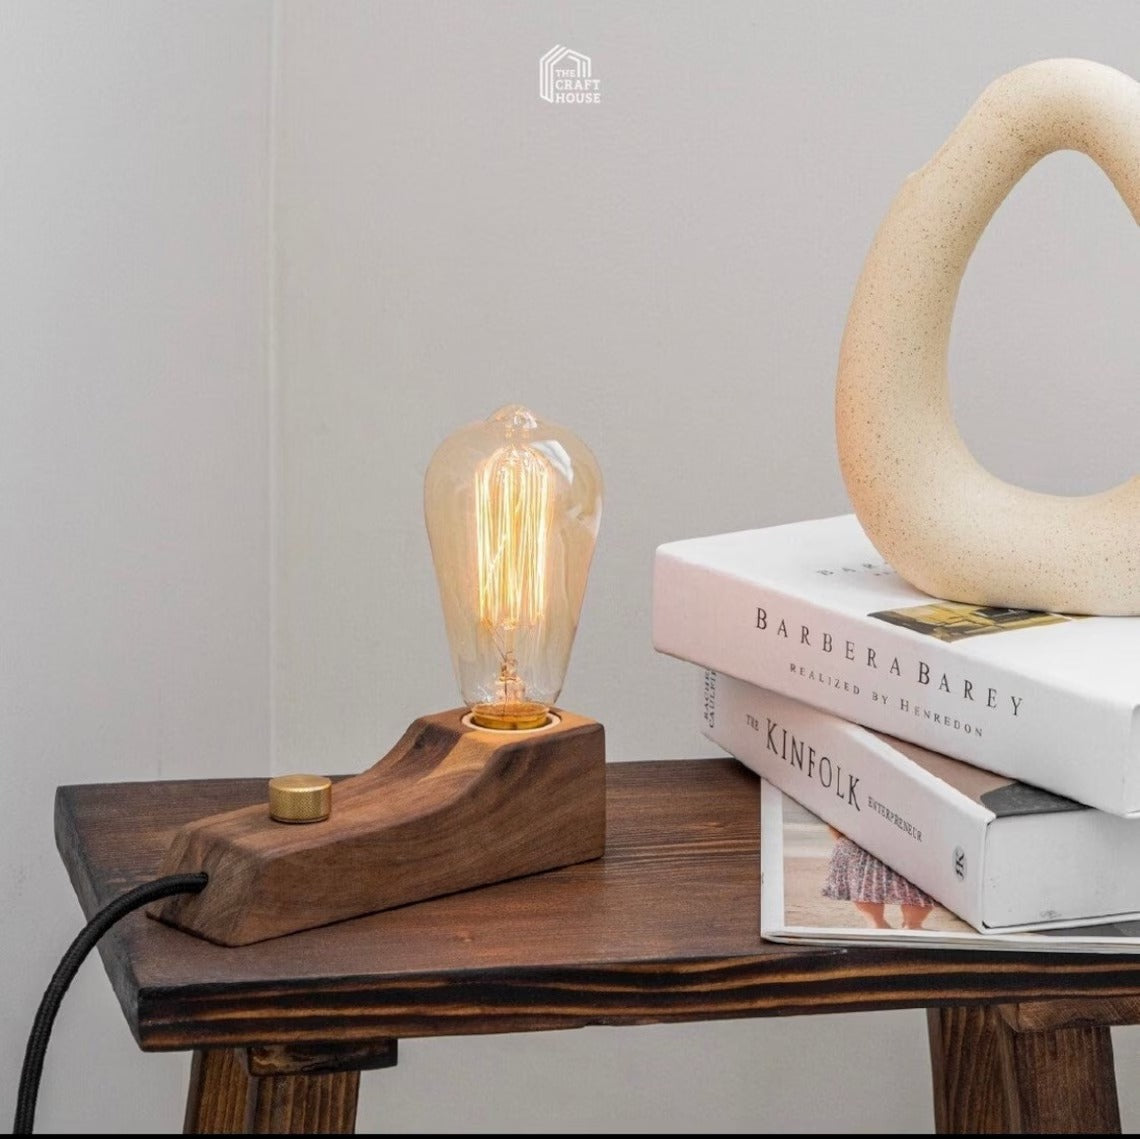 Small Wood Table Lamp